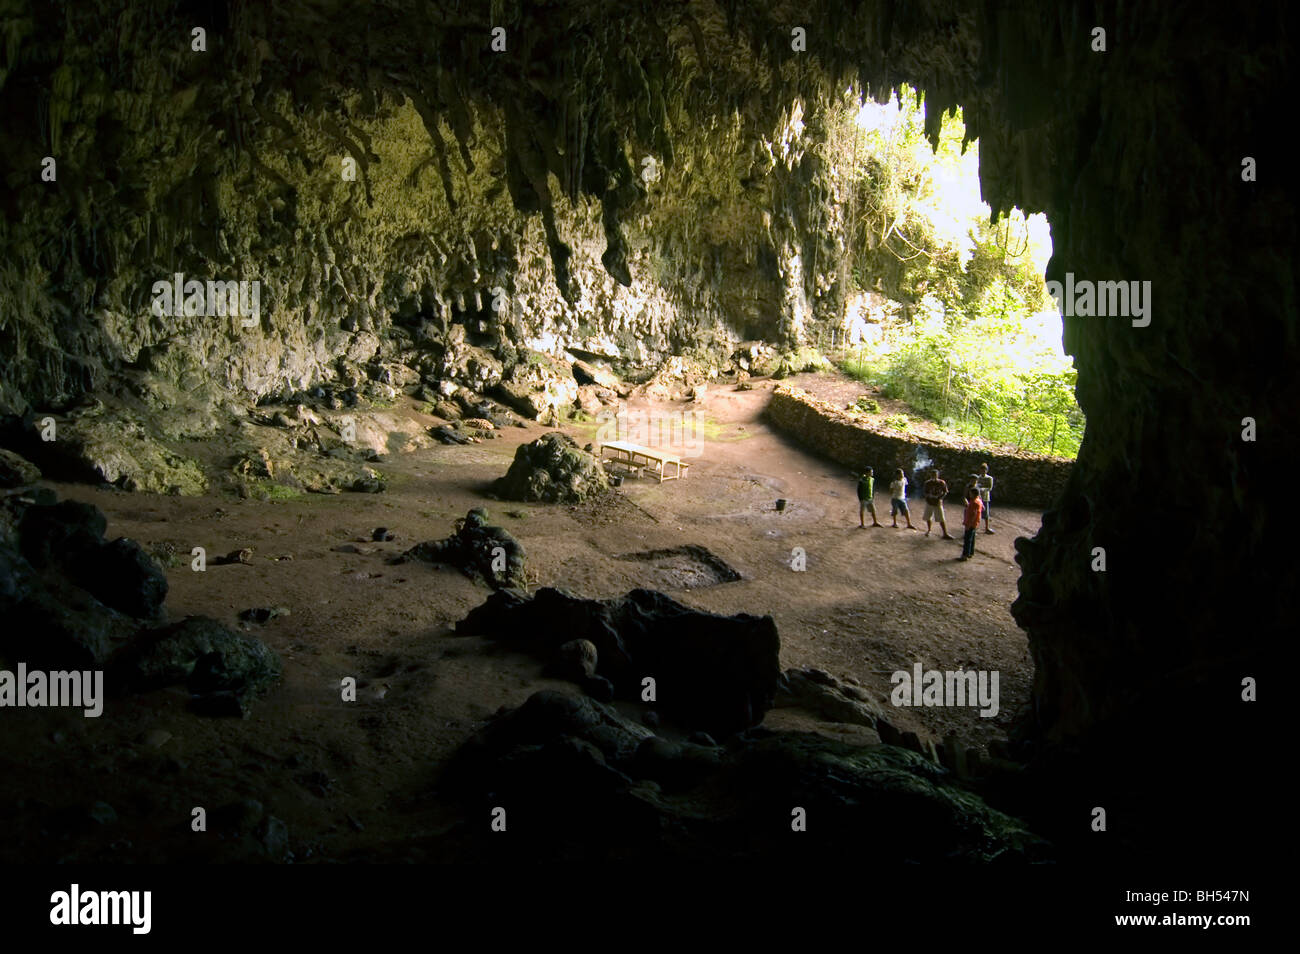 Liang Bua, the cave where Homo floresiensis (the 'hobbit') was uncovered, near Ruteng, Flores, Indonesia. No MR Stock Photo